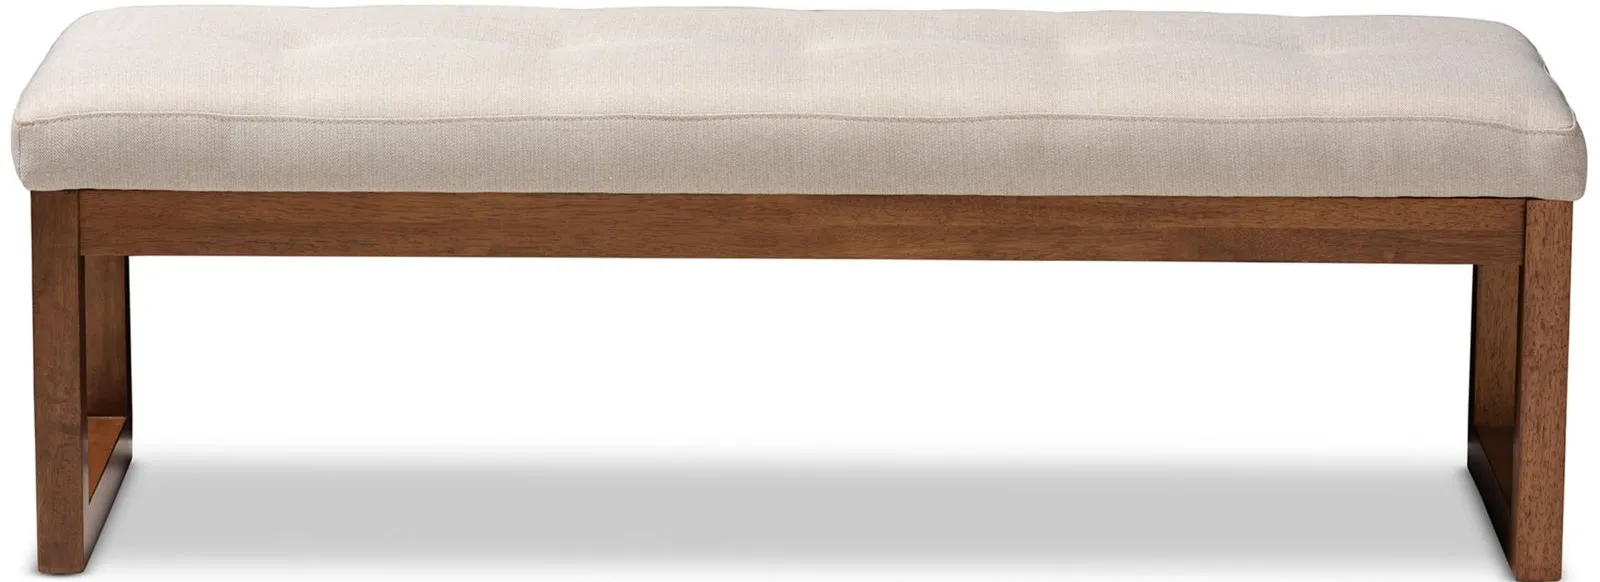 Caramay Fabric Upholstered Wood Bench in Light Beige by Wholesale Interiors